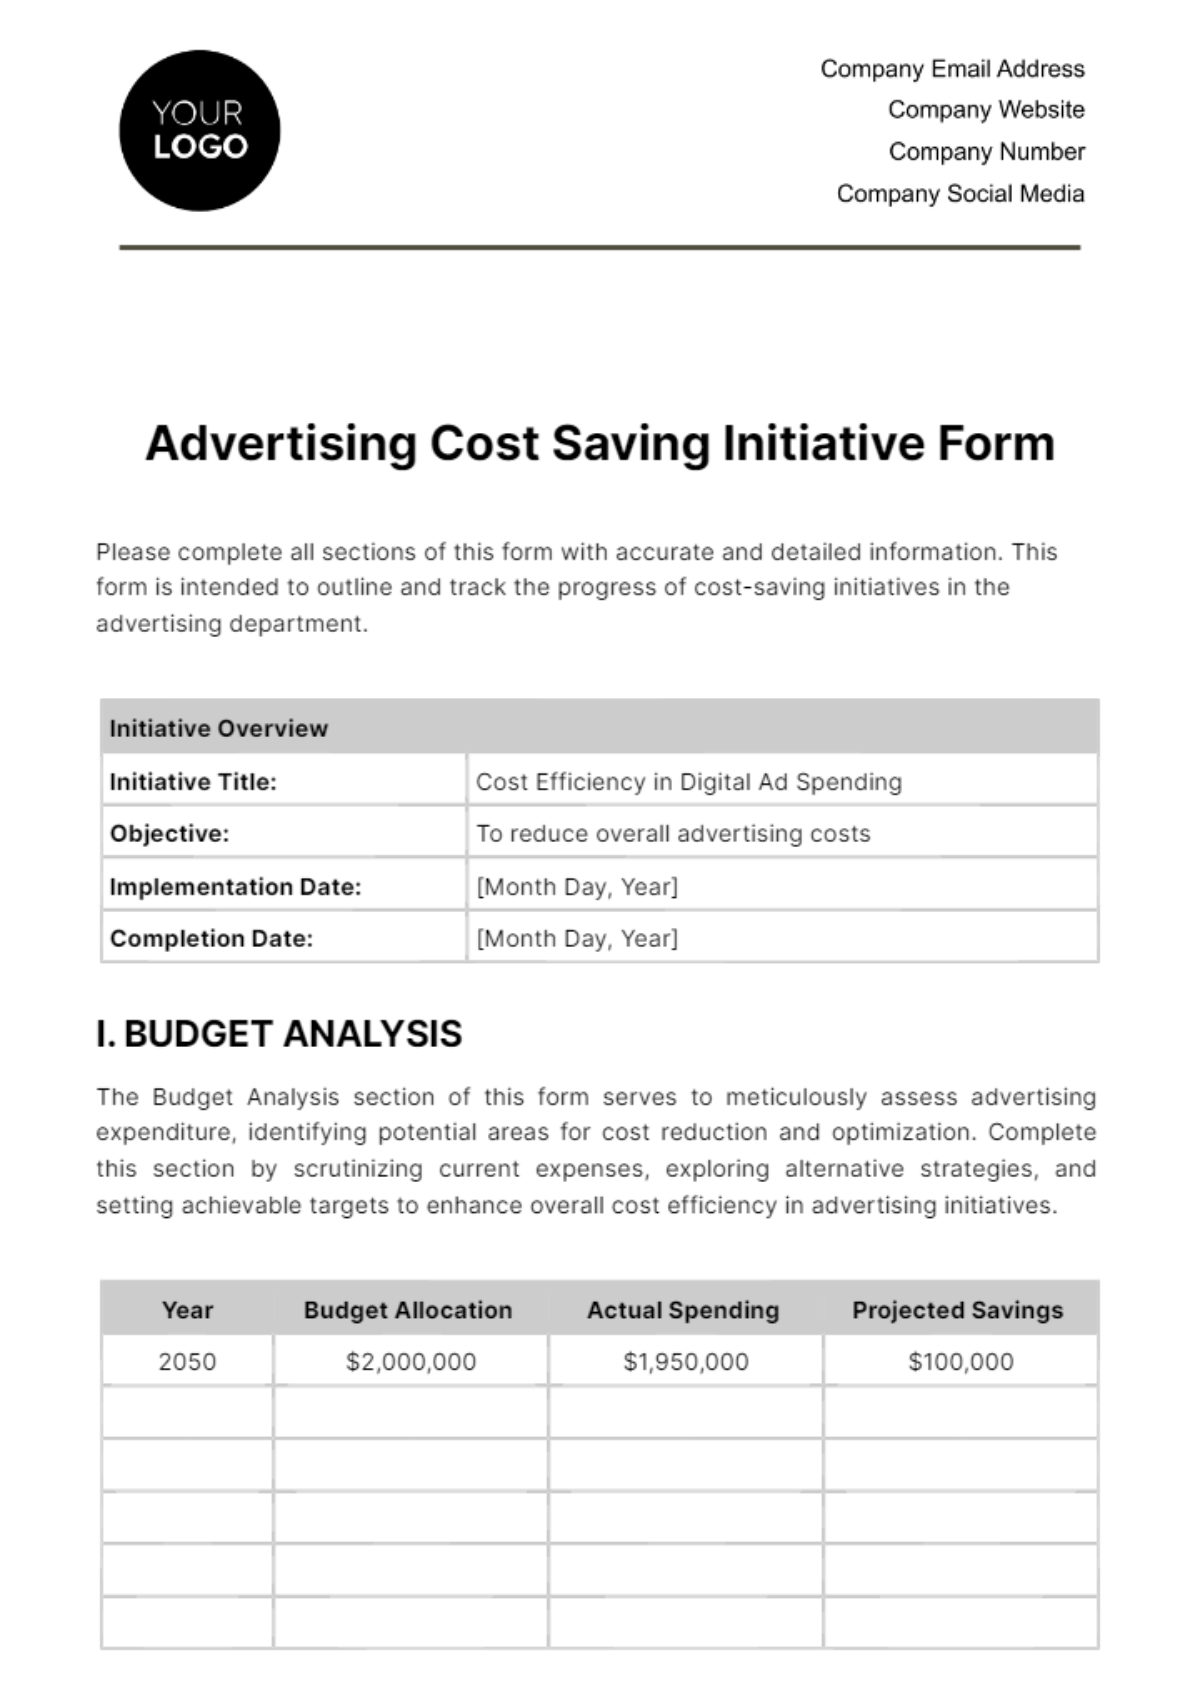 Free Advertising Cost Saving Initiative Form Template